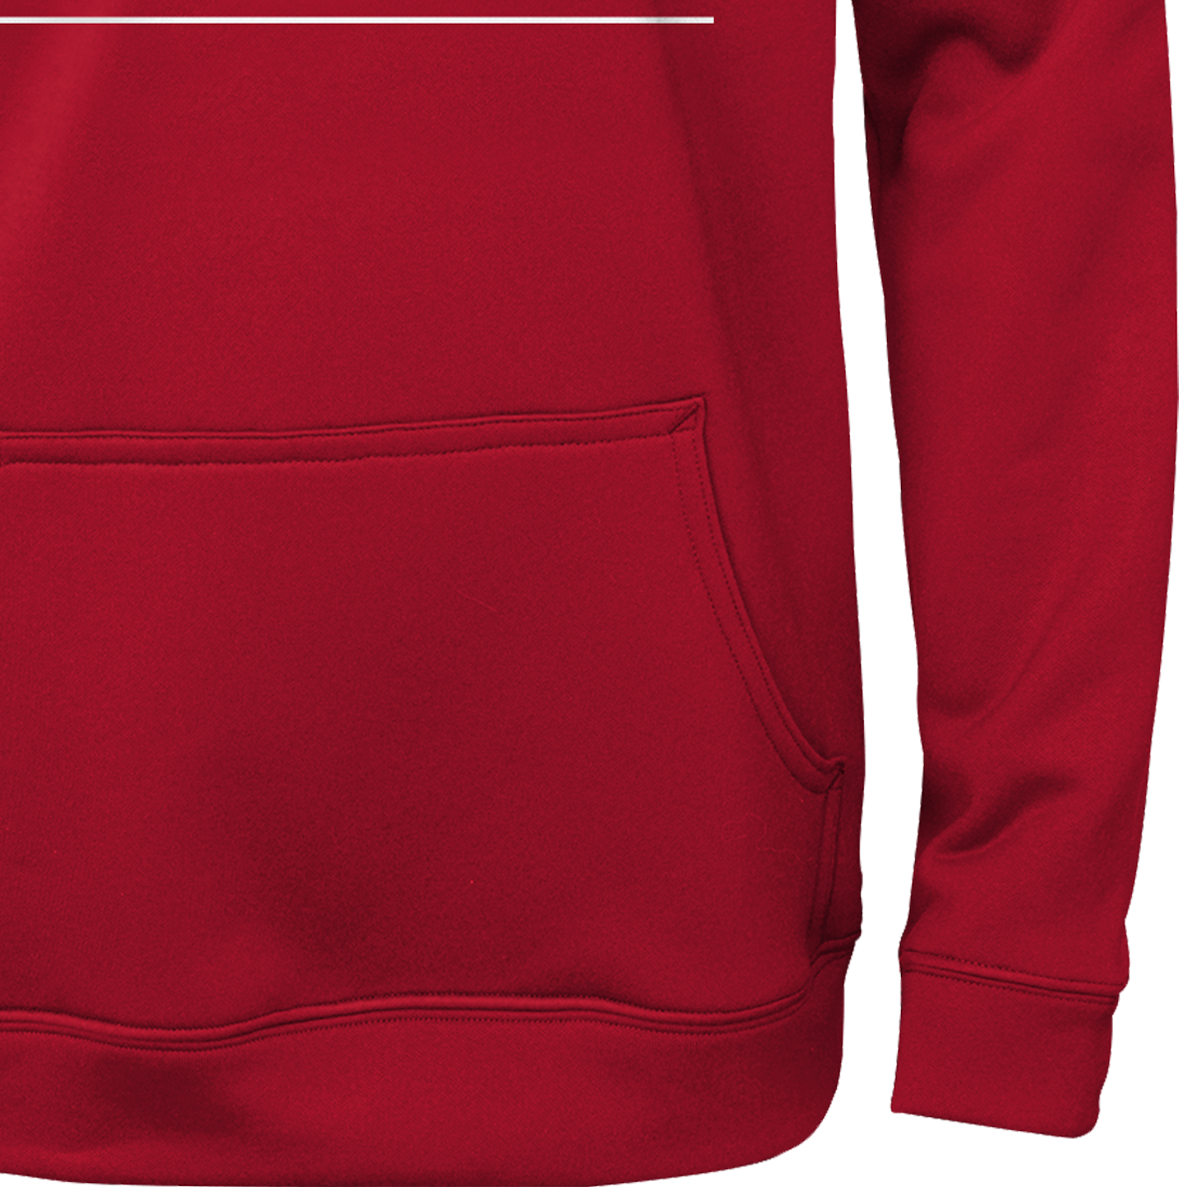 Youth 49ers Play By Play Hoodie alternate view